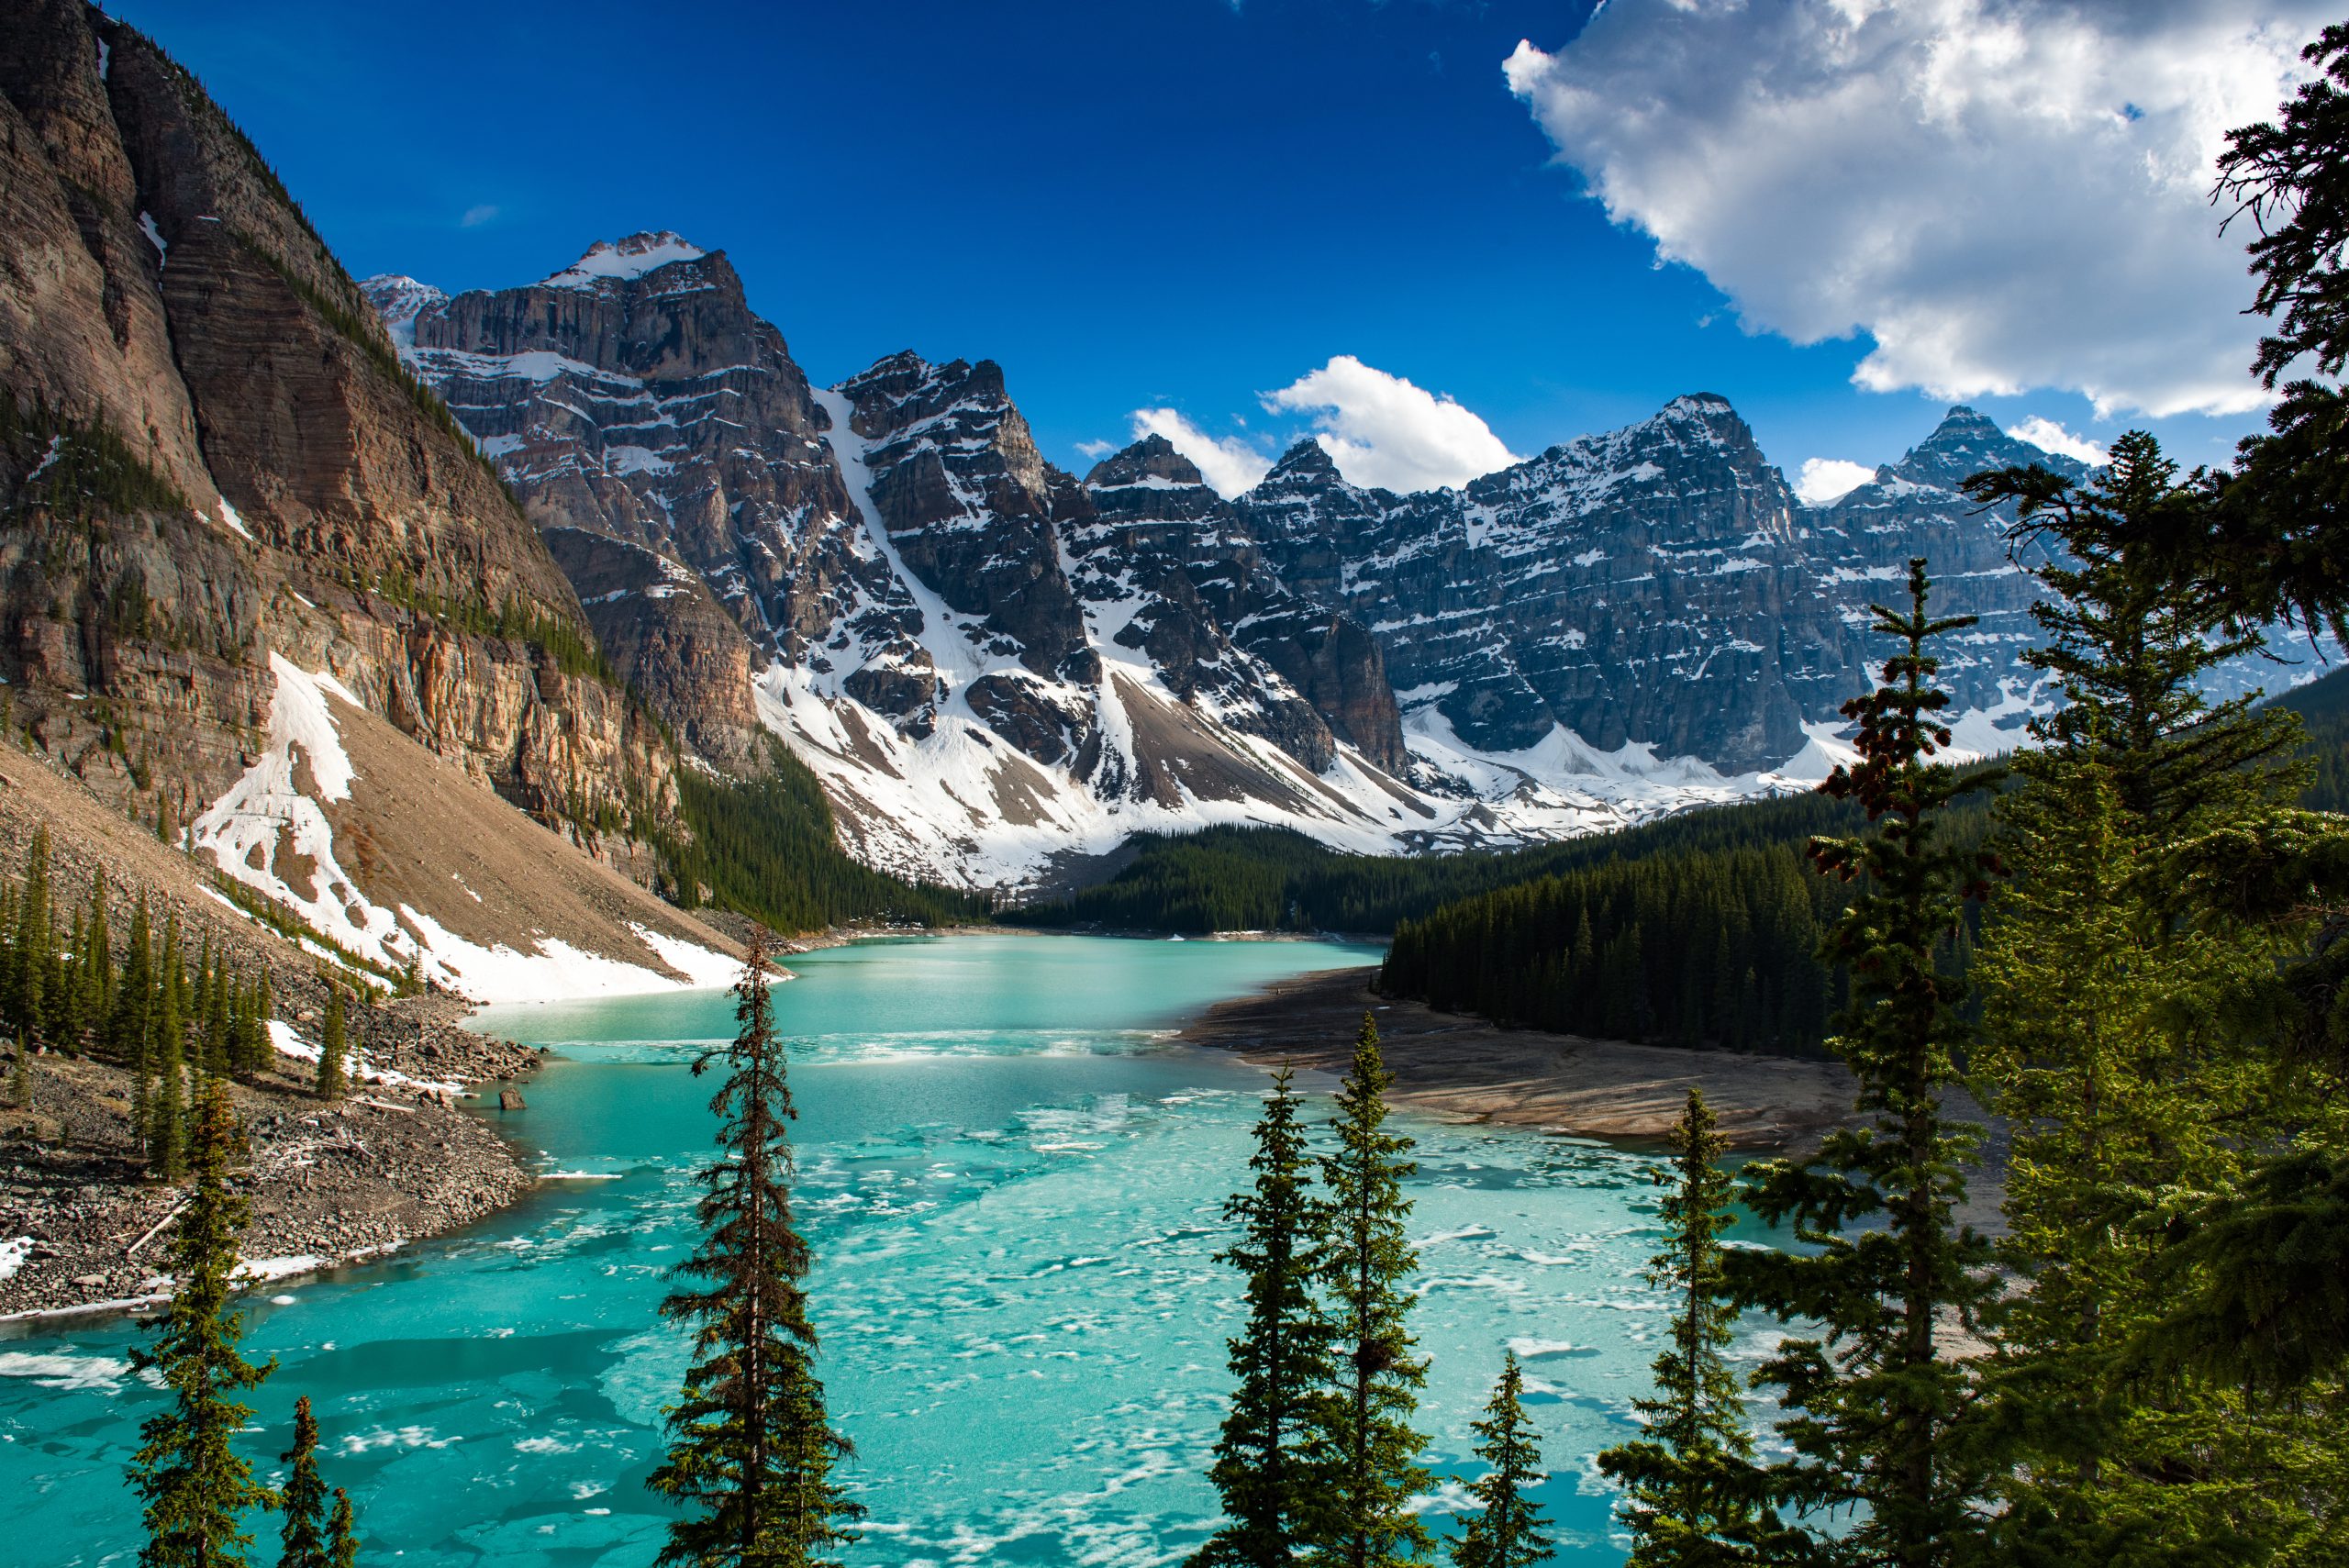 Canadian Rockies by Rail and Silversea Alaskan Cruise - Save $3,000 Per Suite